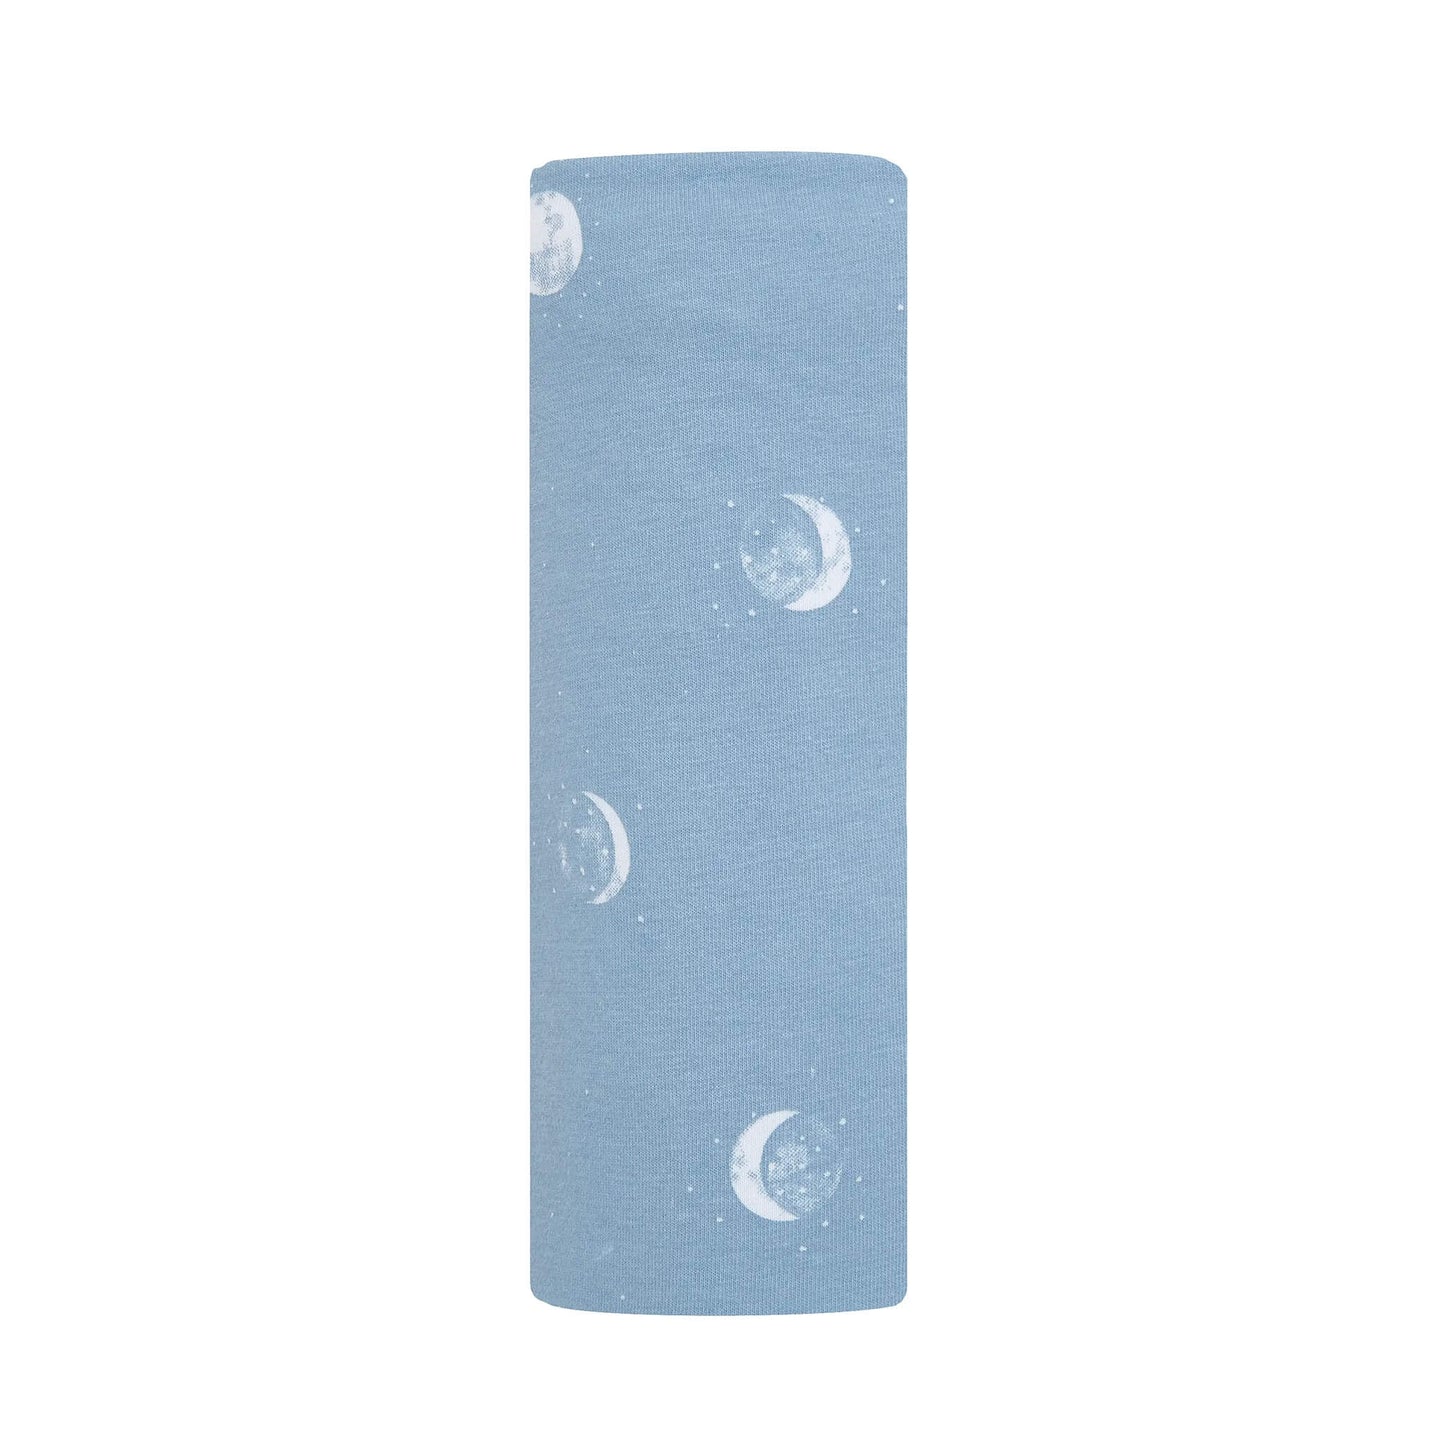 The Aden + anais cotton-rich comfort knit newborn swaddle blanket, with its gentle stretch and remarkable softness, provides comfort for the baby and ease for parents.